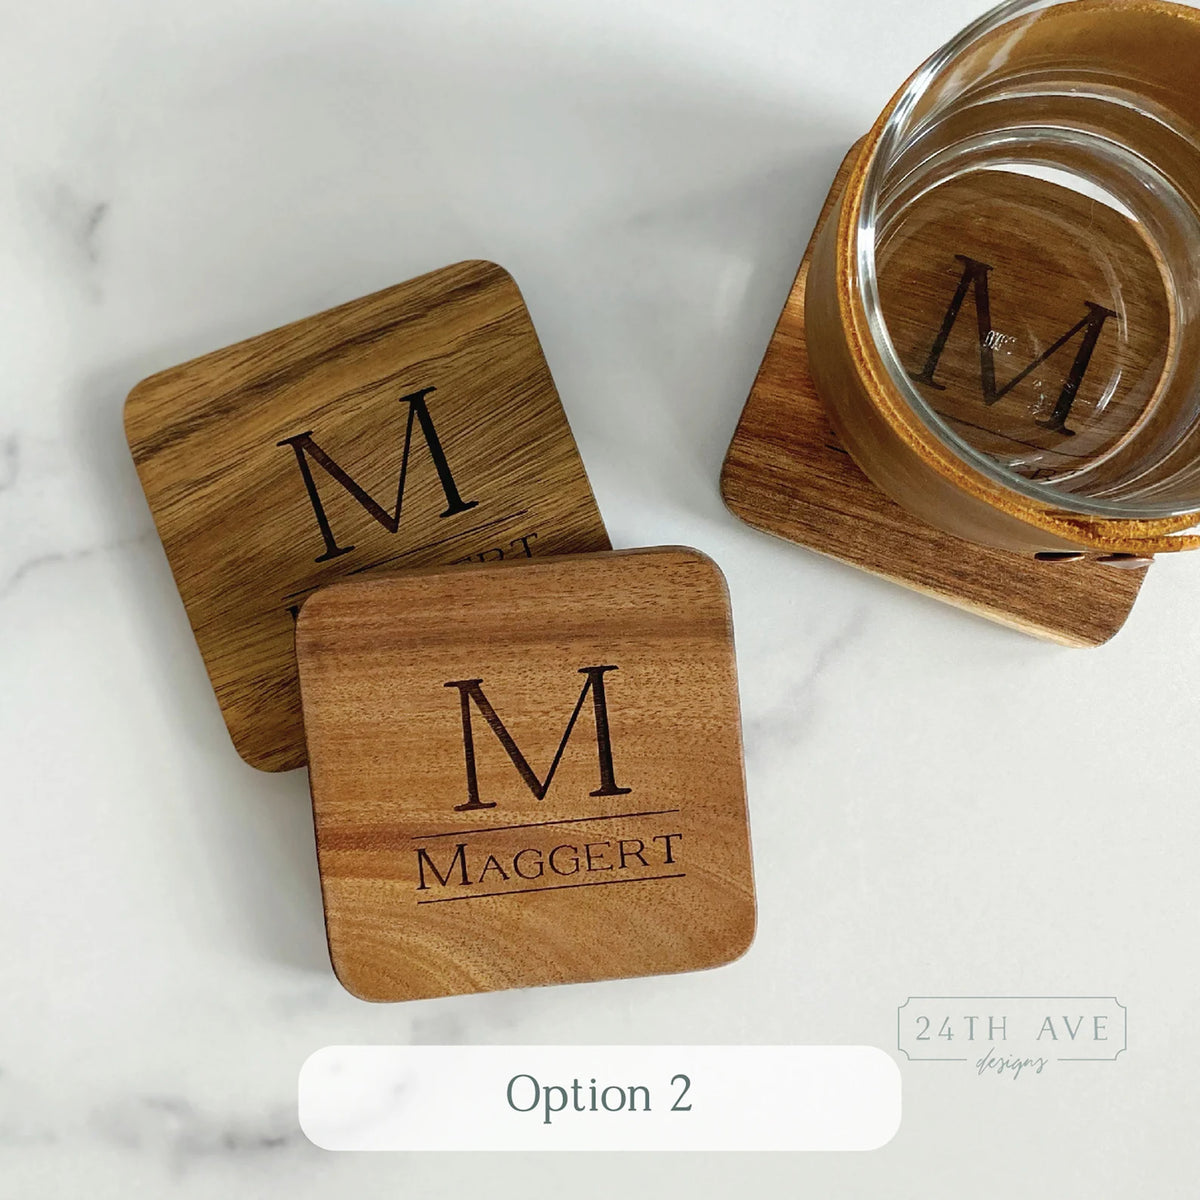 Personalized Wooden Engraved Round Coasters Set